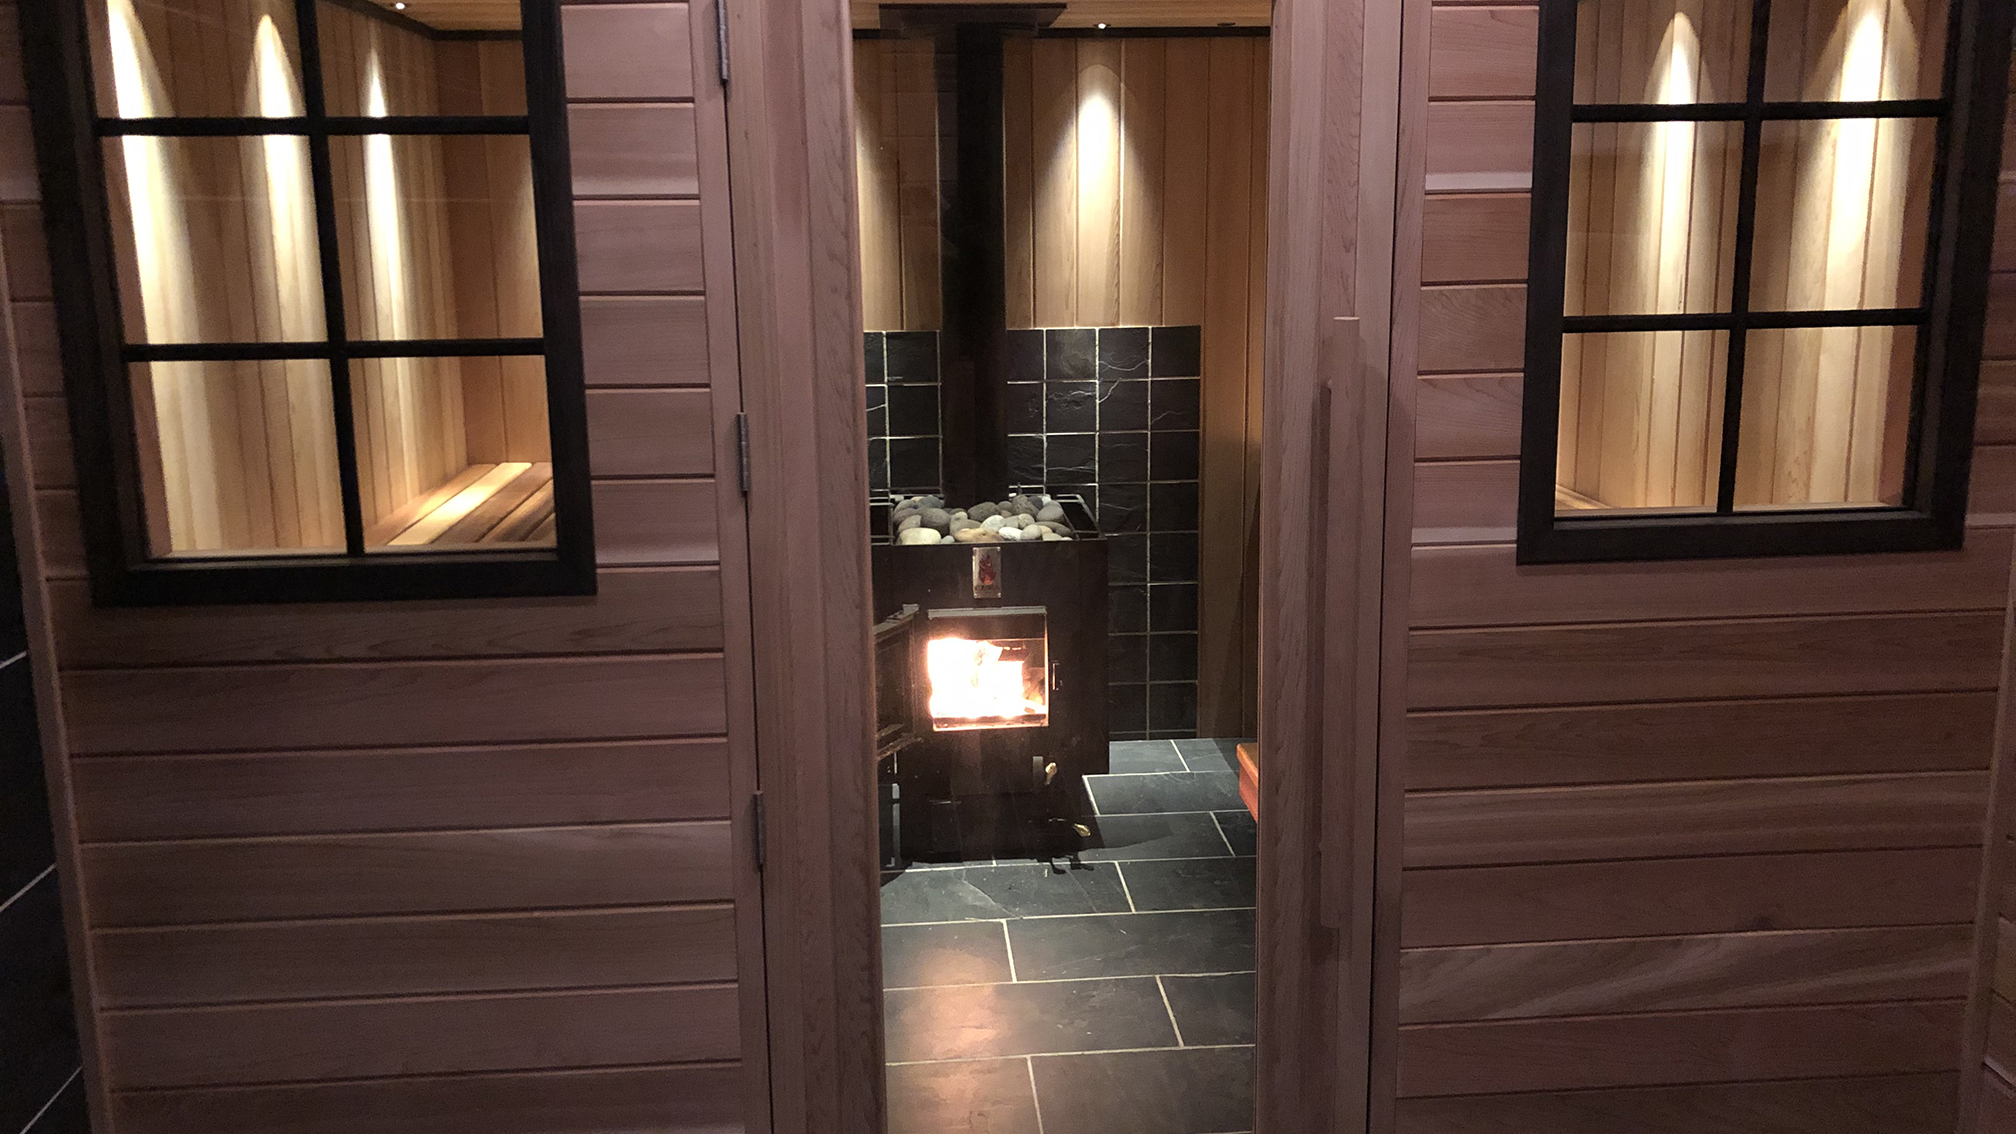 As you look through the glass door main entrance of the Imogene's Sauna you can see the warm glow of the sauna's fire.